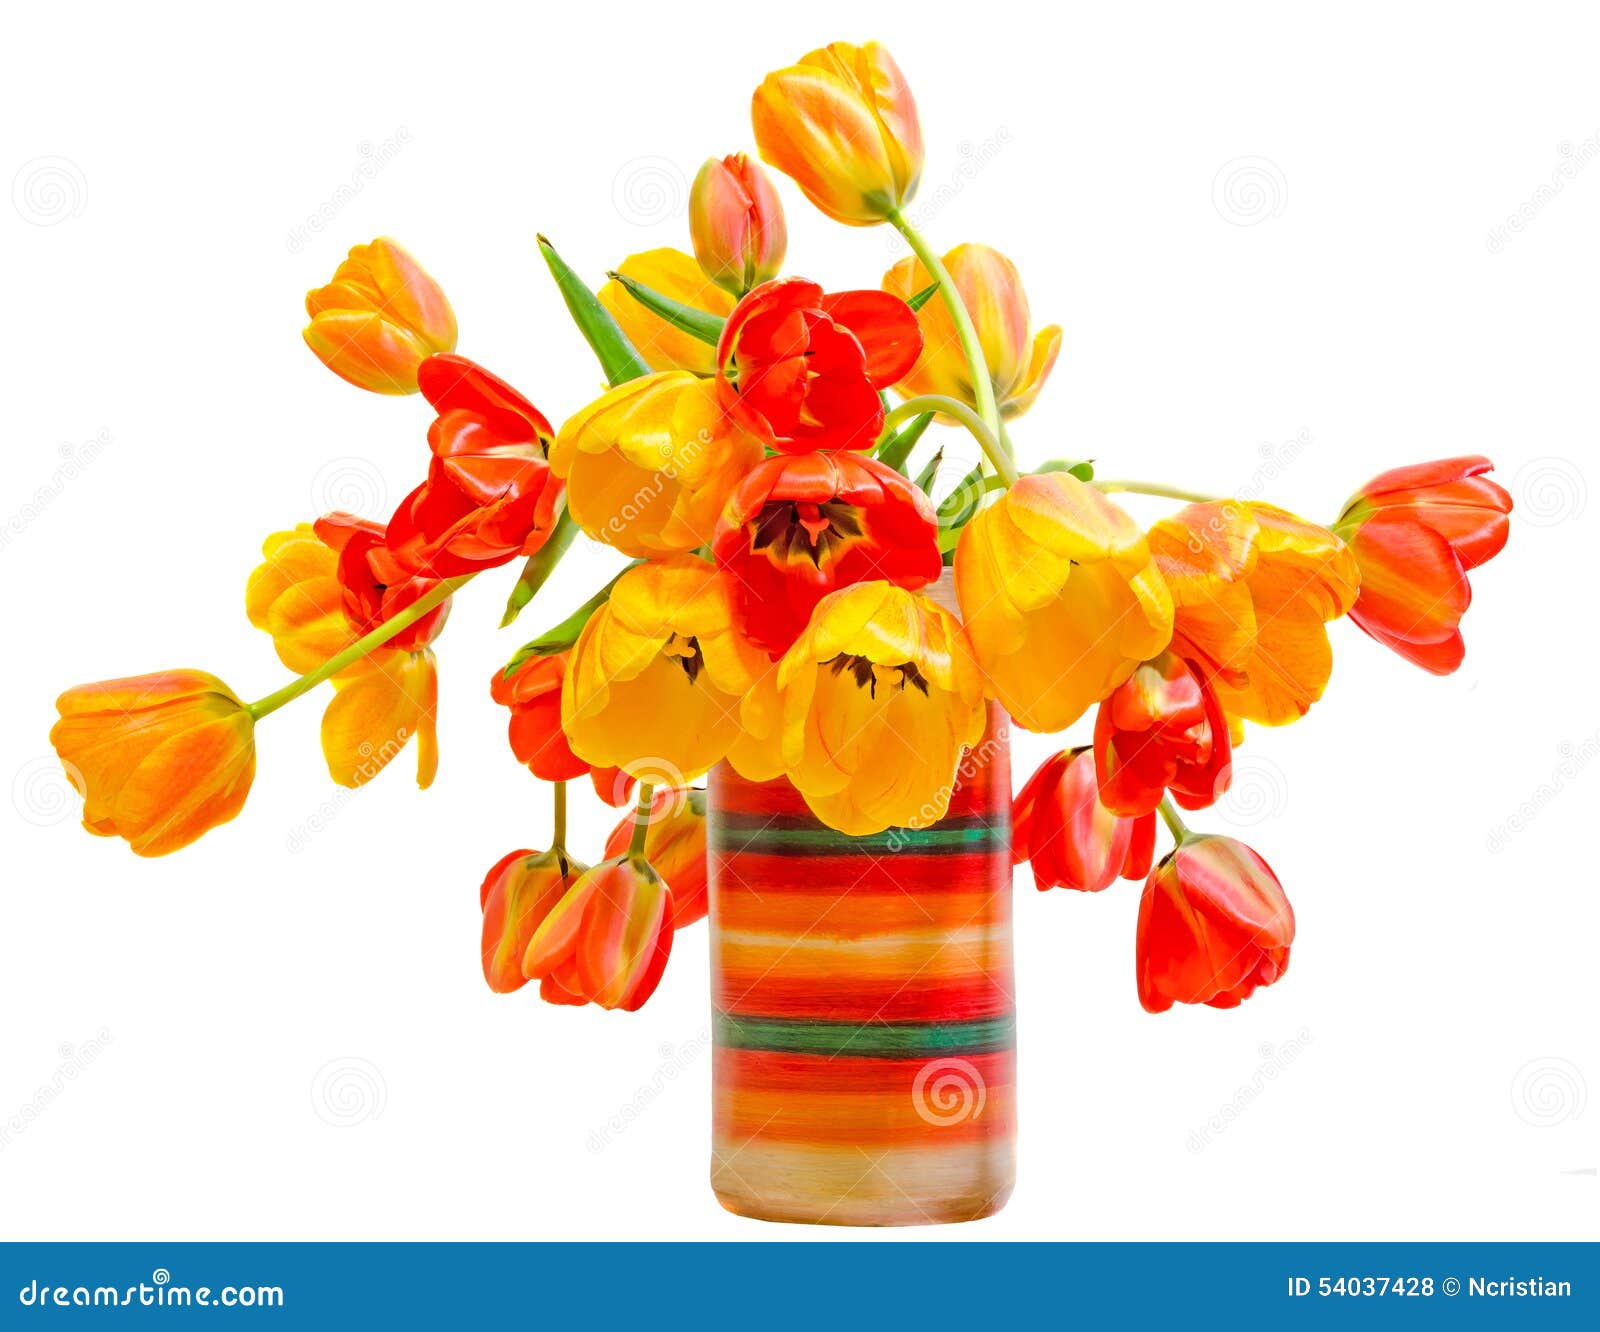 Red, Yellow And Orange Tulips Flowers In Colored Rustic Vase, Floral ...